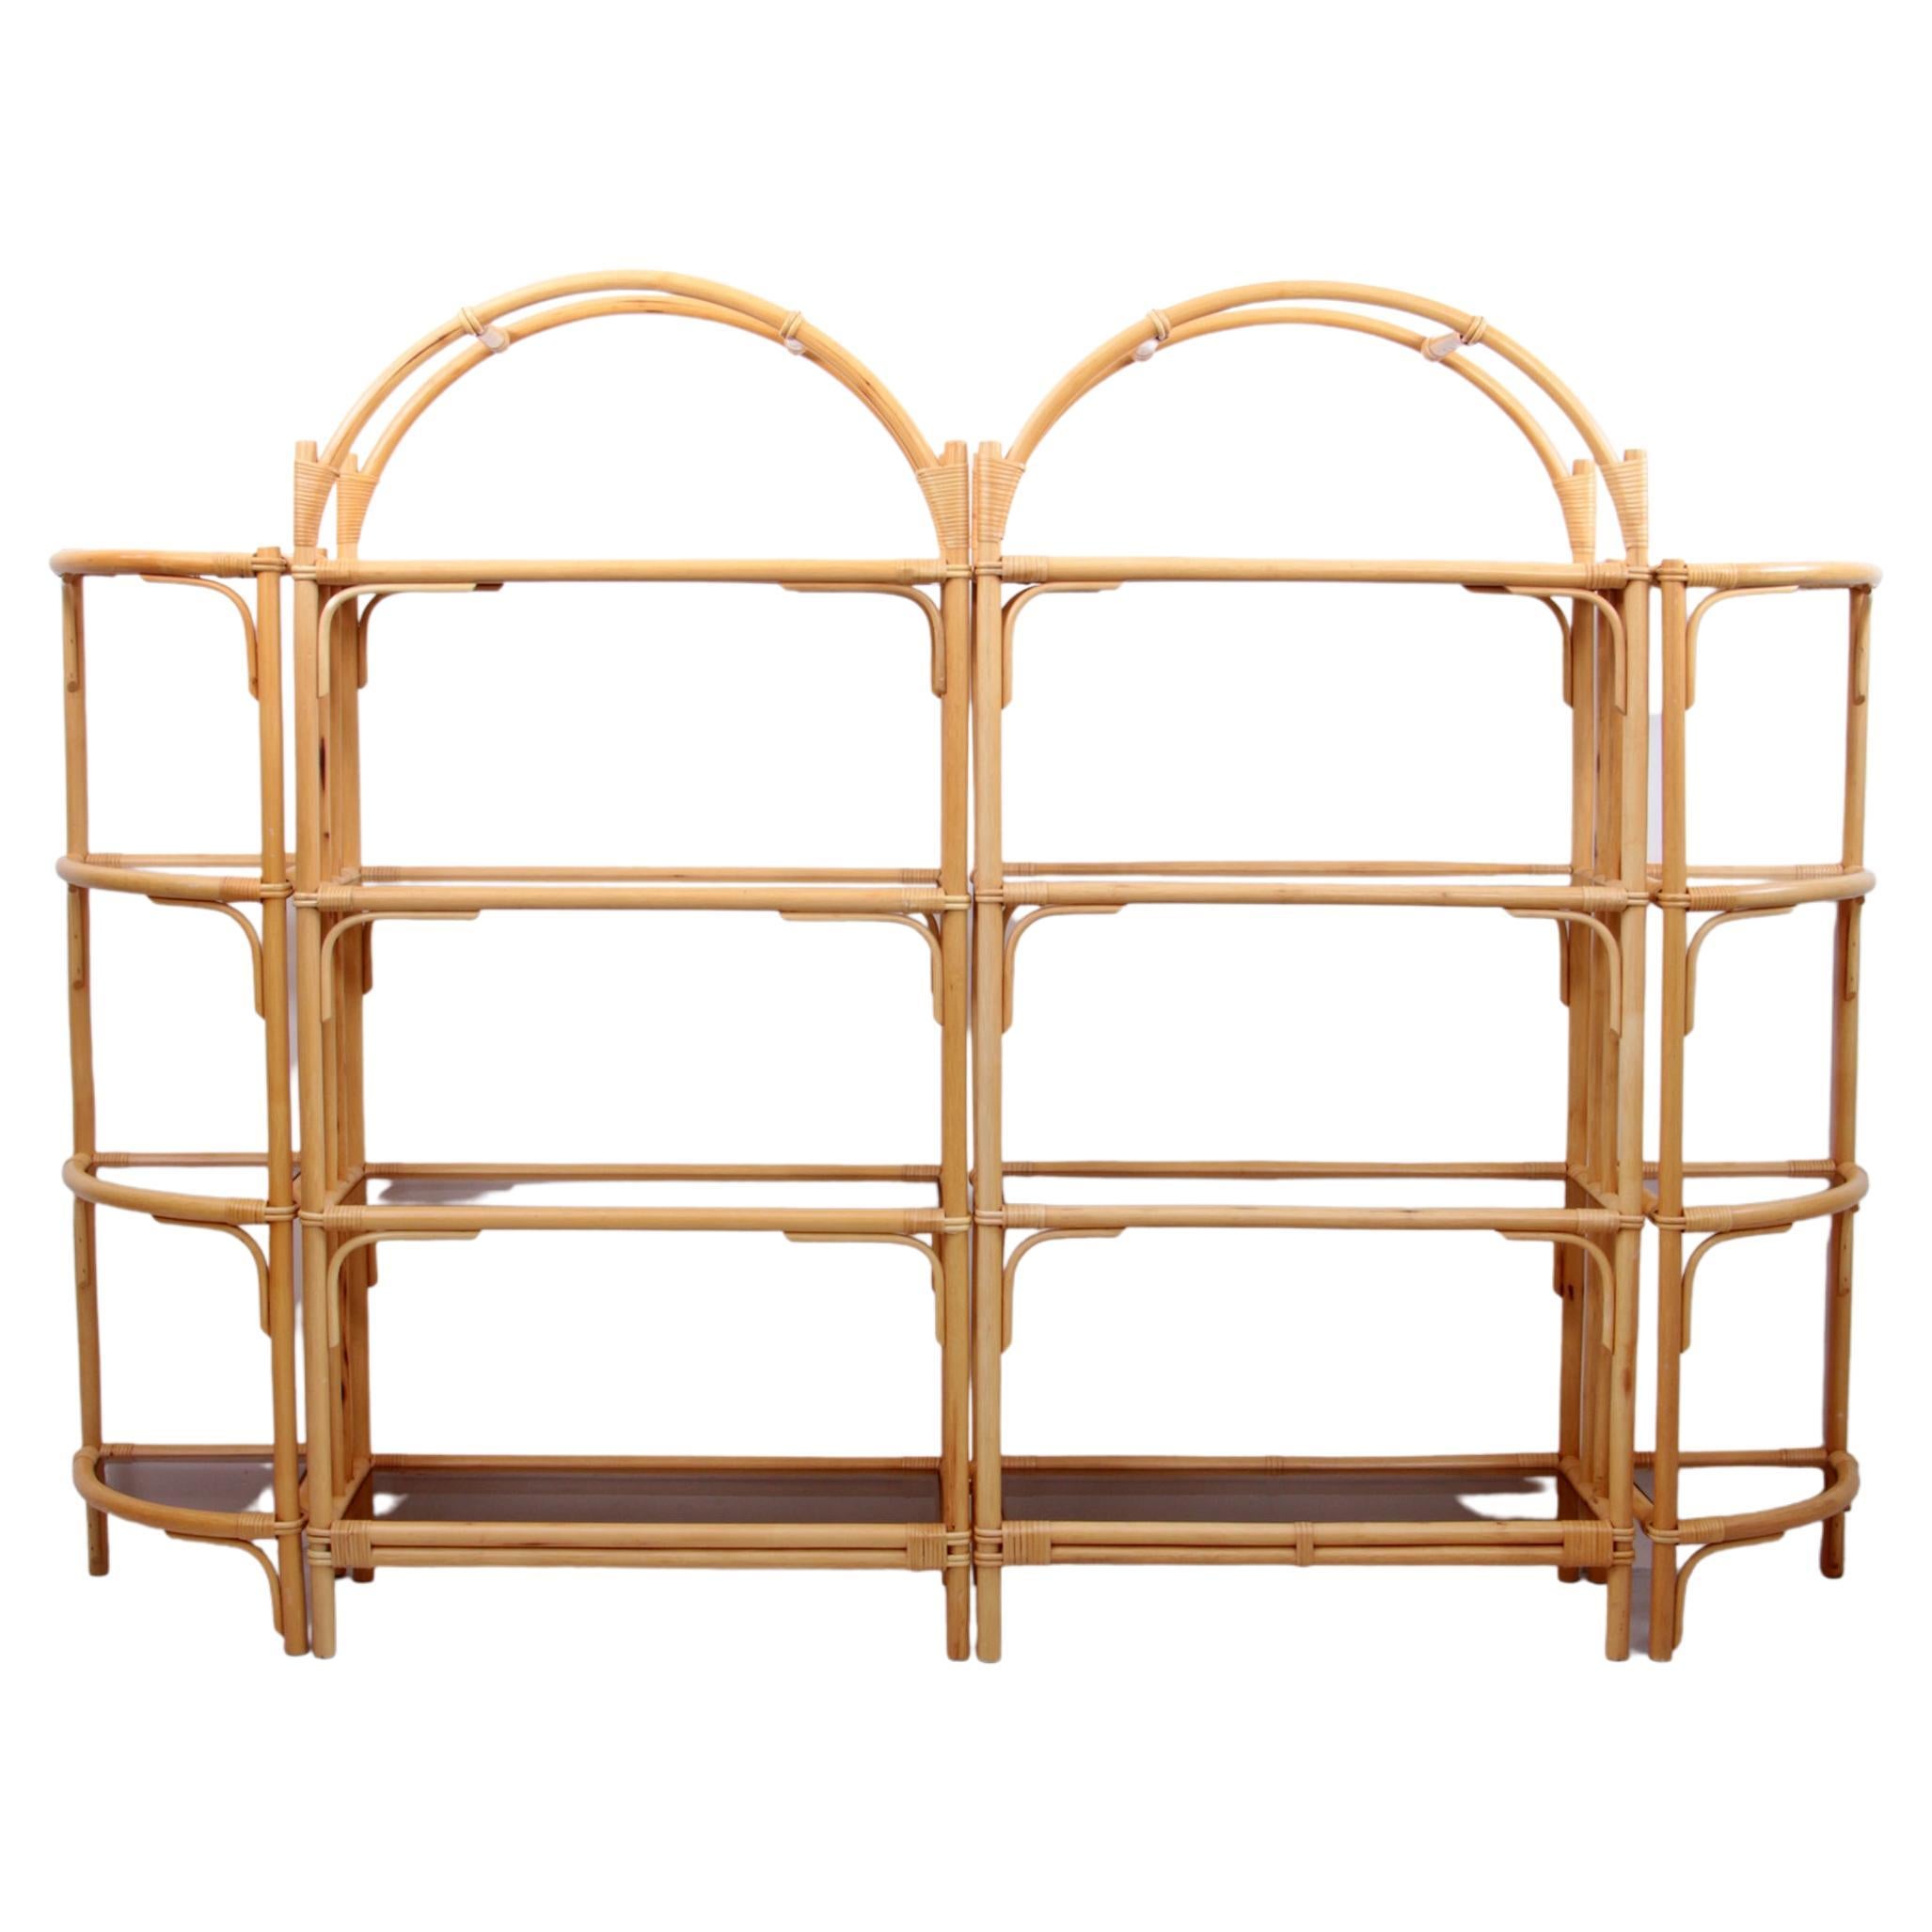 Large Bamboo Wall Unit with Bamboo Arches and Dark Glass, Denmark